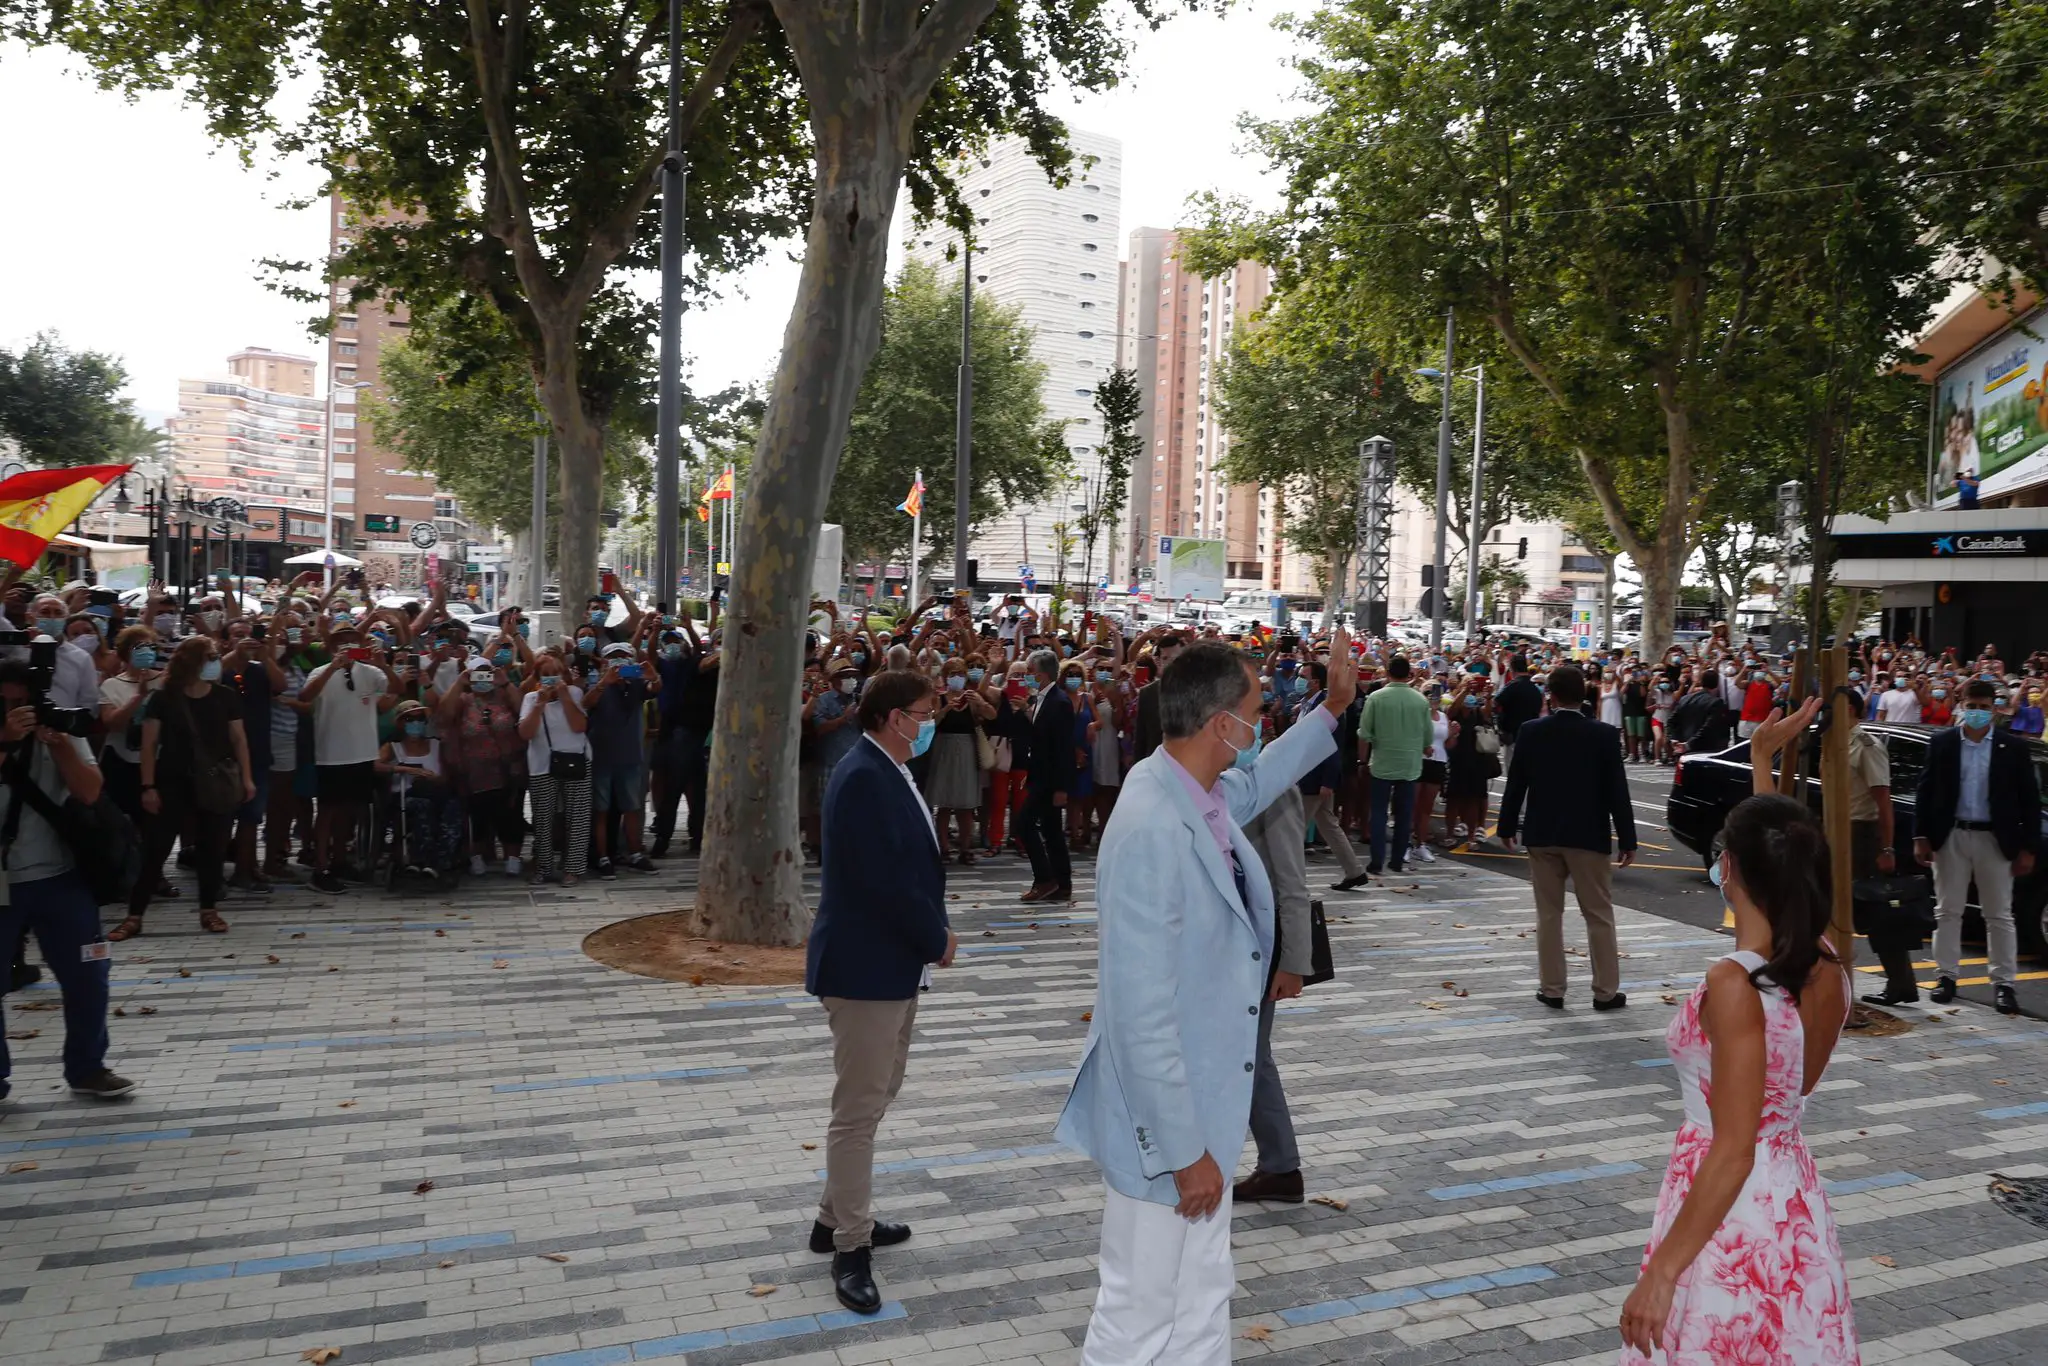 King Felipe and Queen Letizia of Spain received warm welcome in Valencia